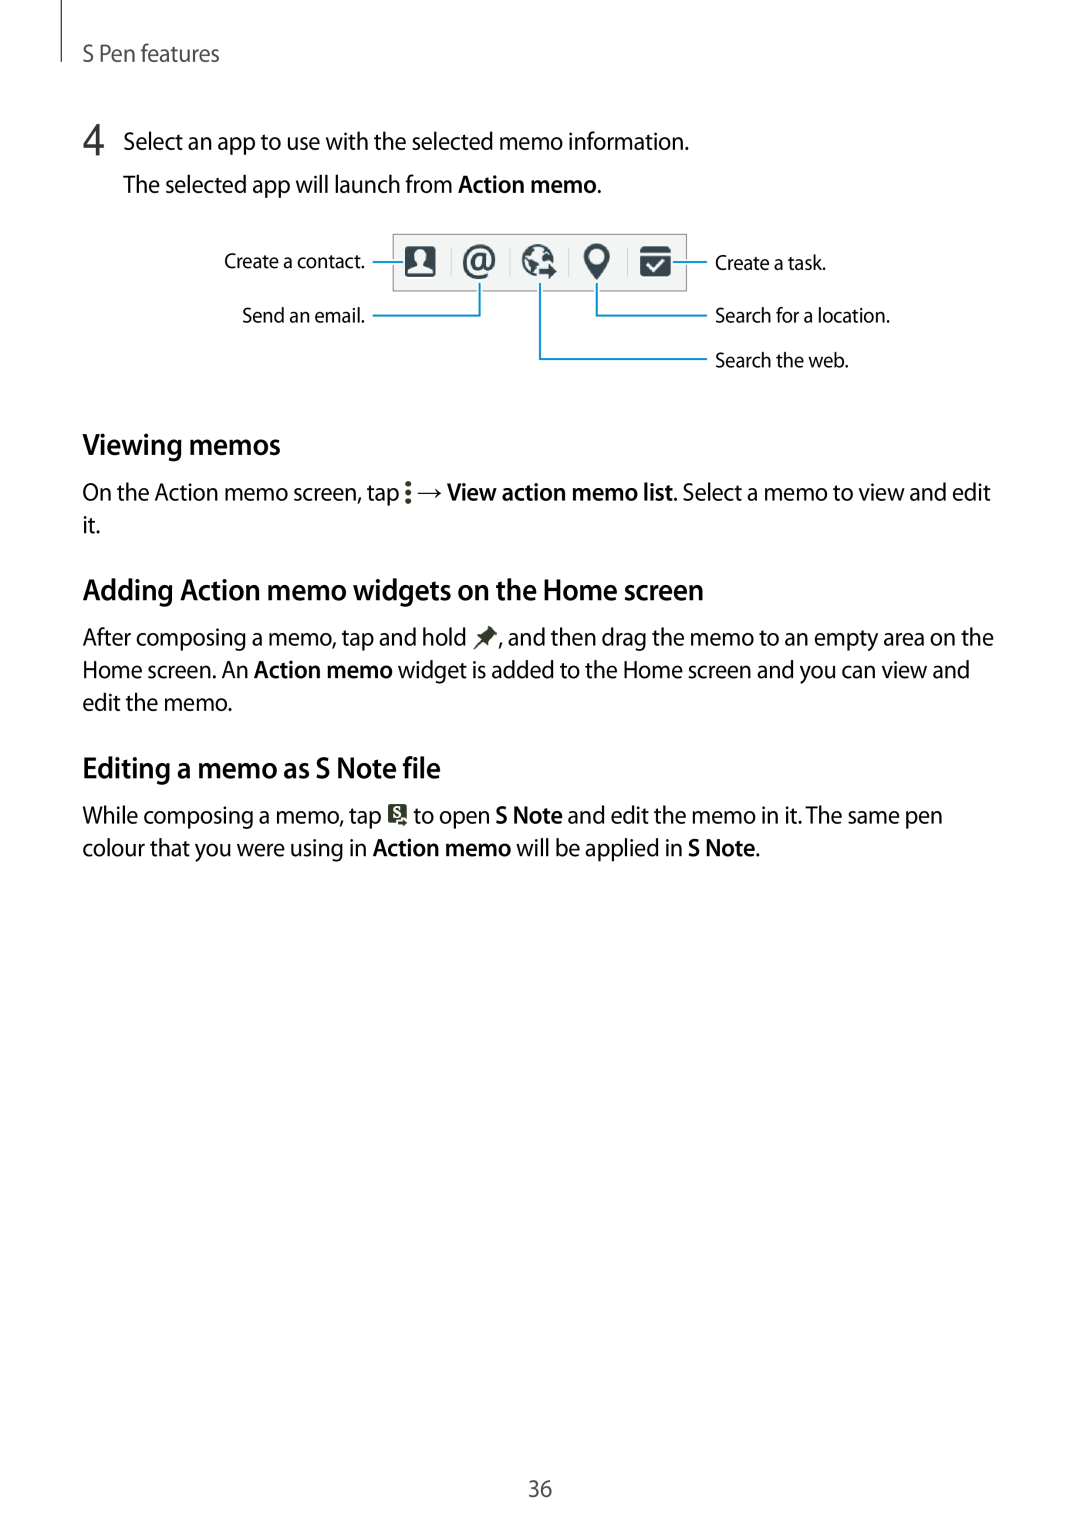 Samsung SM-P550NZWAEUR manual Viewing memos, Adding Action memo widgets on the Home screen, Editing a memo as S Note file 